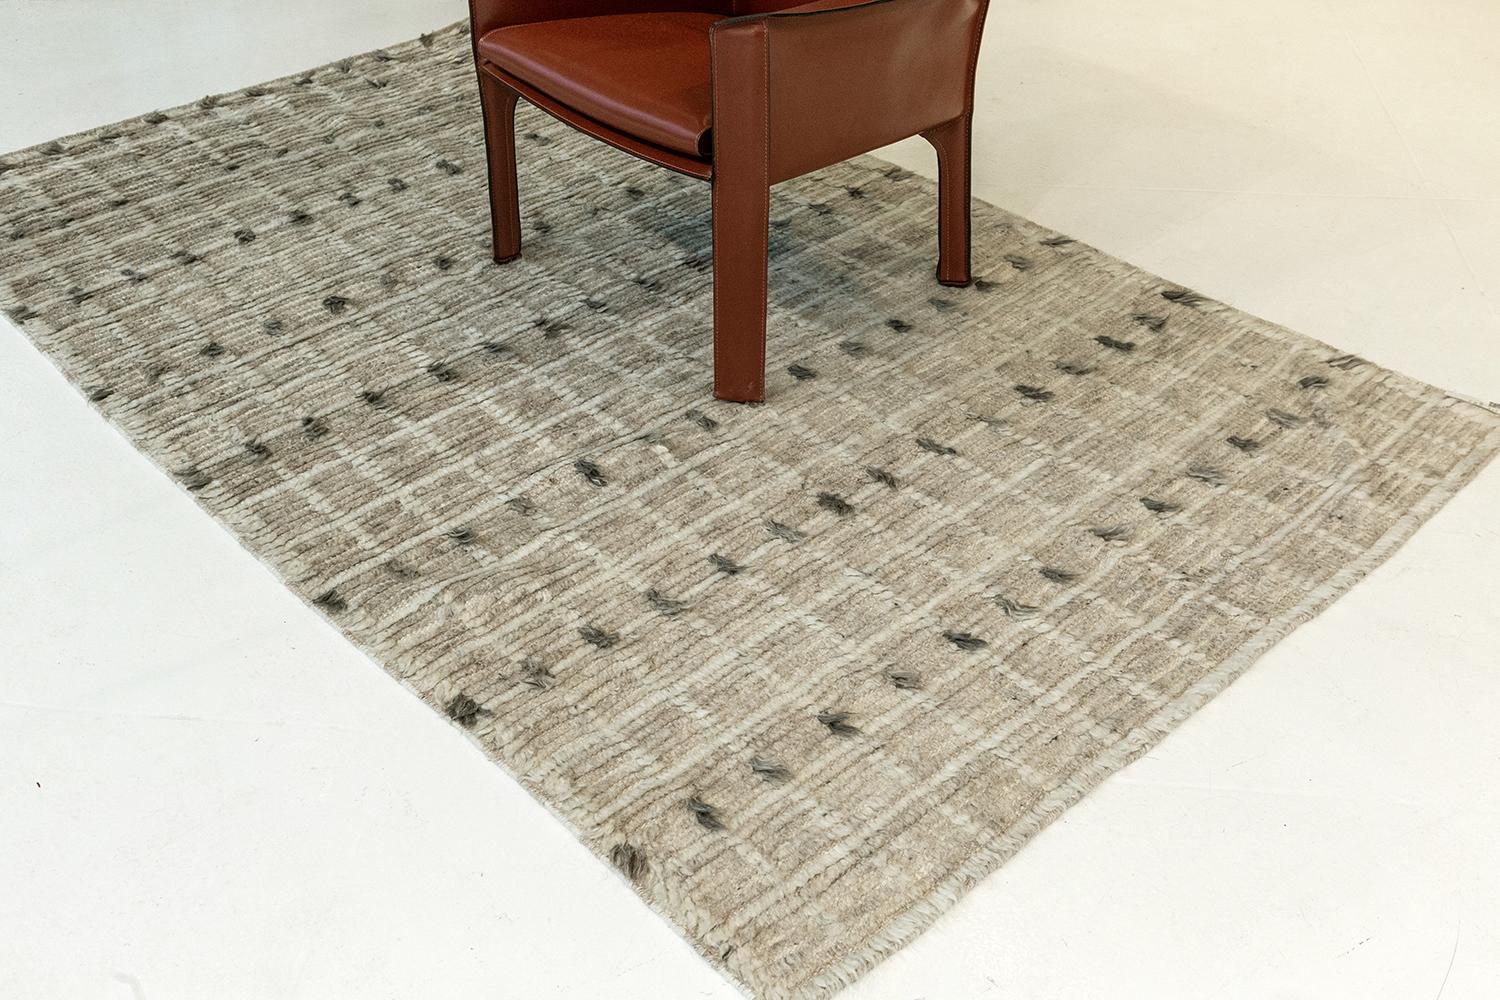 Amihan is a beautifully detailed pile weave from our Atlas Collection. The delicate checkered and ribbed style rug with earthy charcoal tones give it a rich and charming feel. Repeating black pile detailing also brings a bold and noteworthy